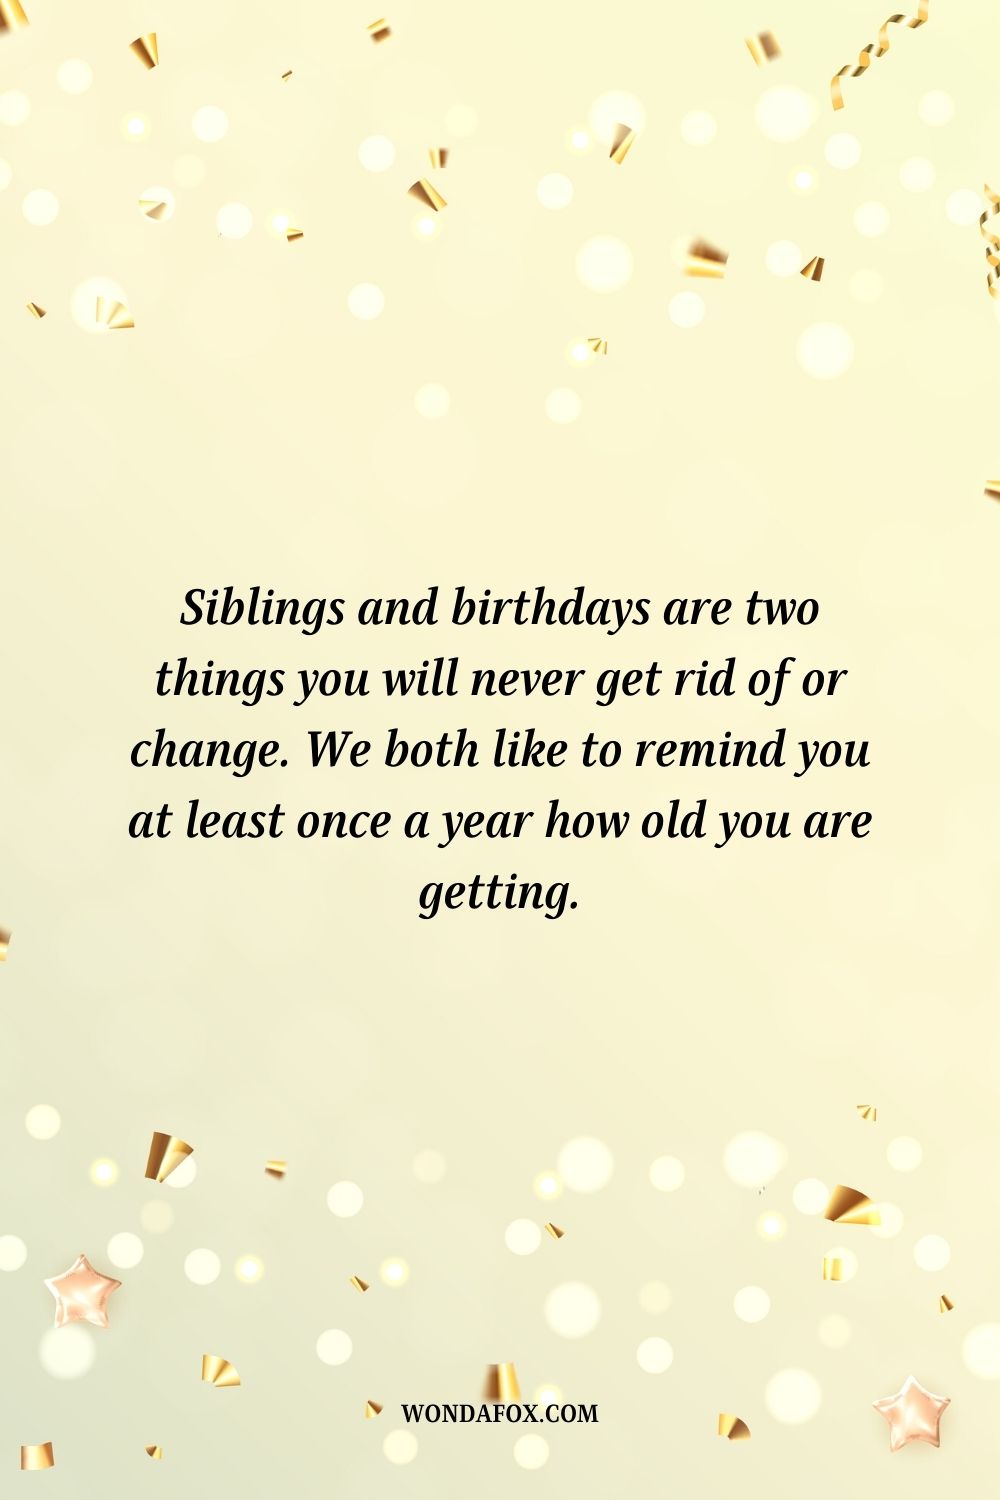 Siblings and birthdays are two things you will never get rid of or change. We both like to remind you at least once a year how old you are getting.